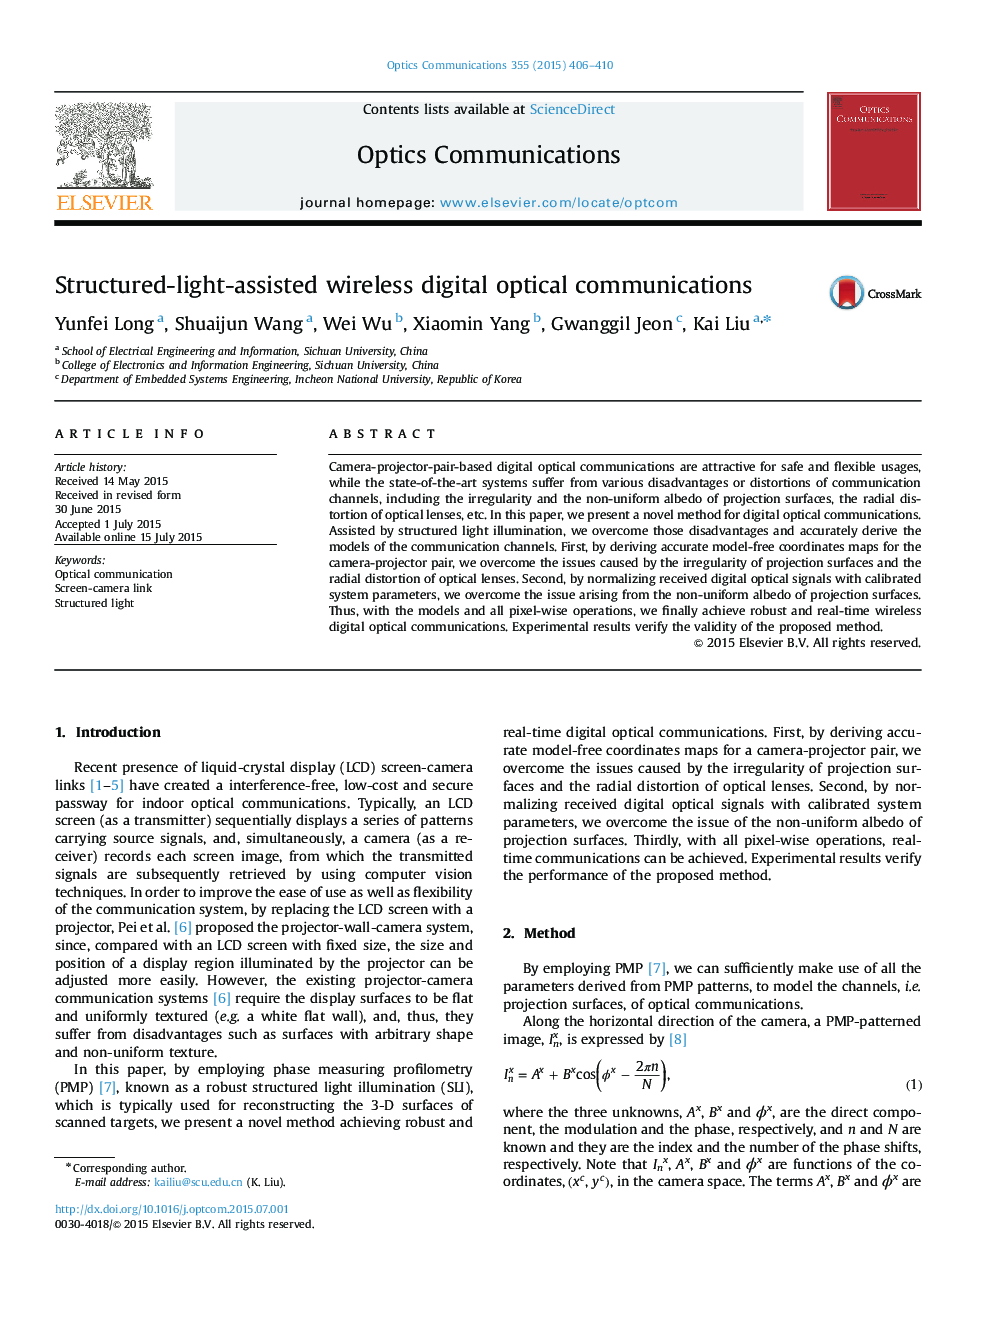 Structured-light-assisted wireless digital optical communications